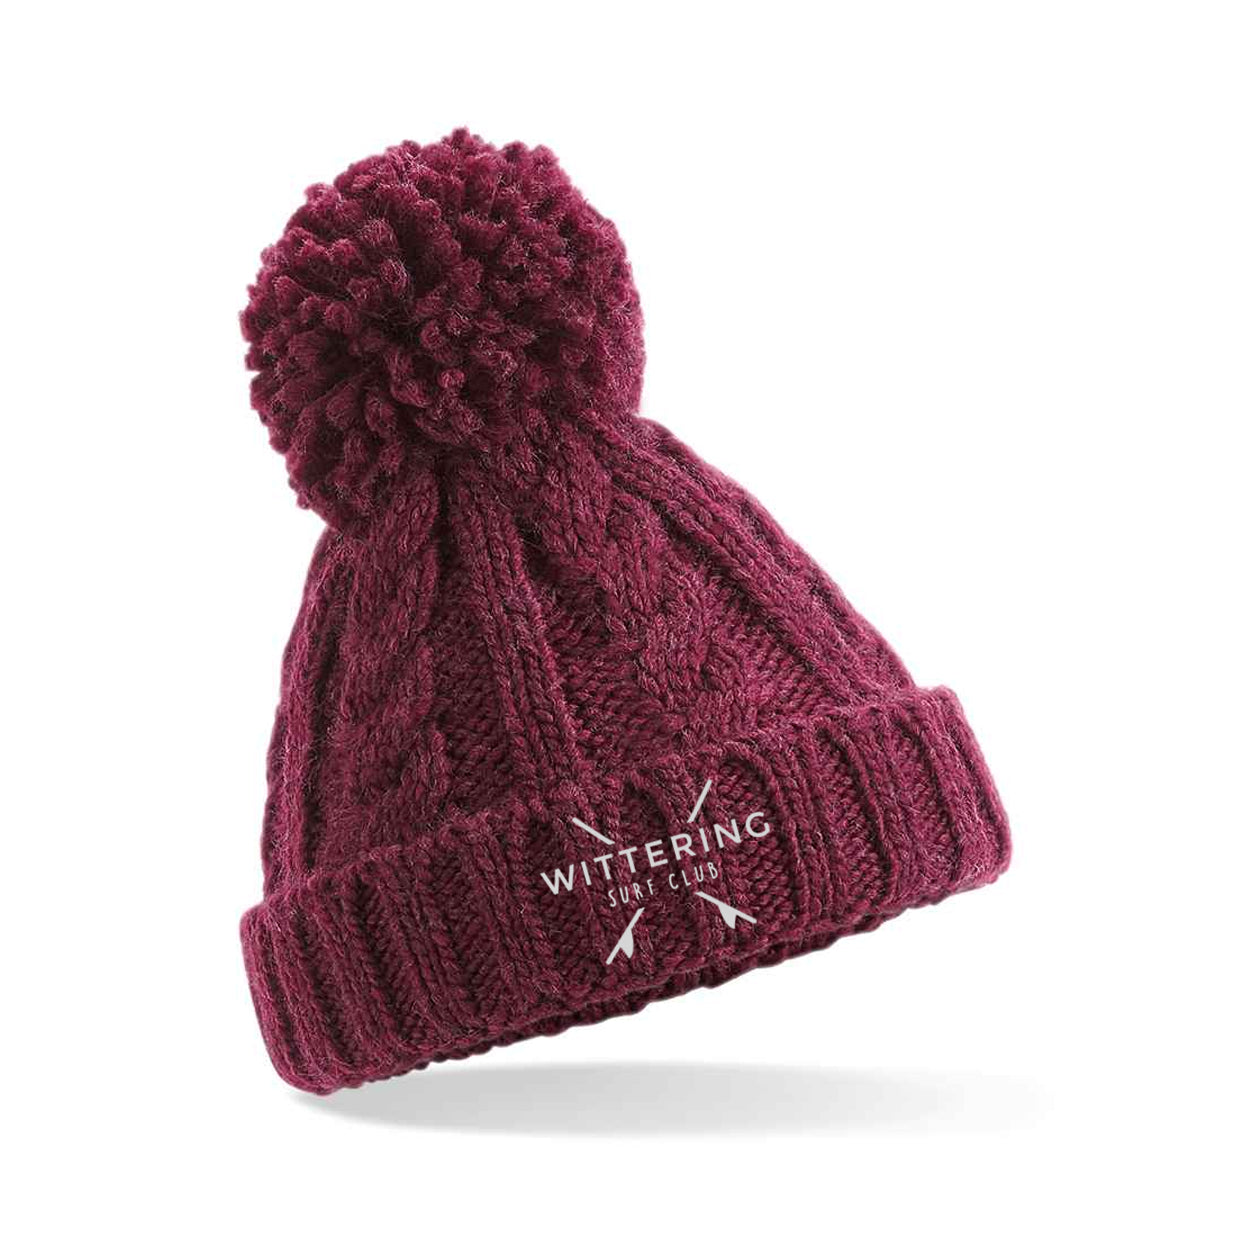 KIDS CHUNKY KNIT BEANIE - MAROON - Wittering Surf Shop